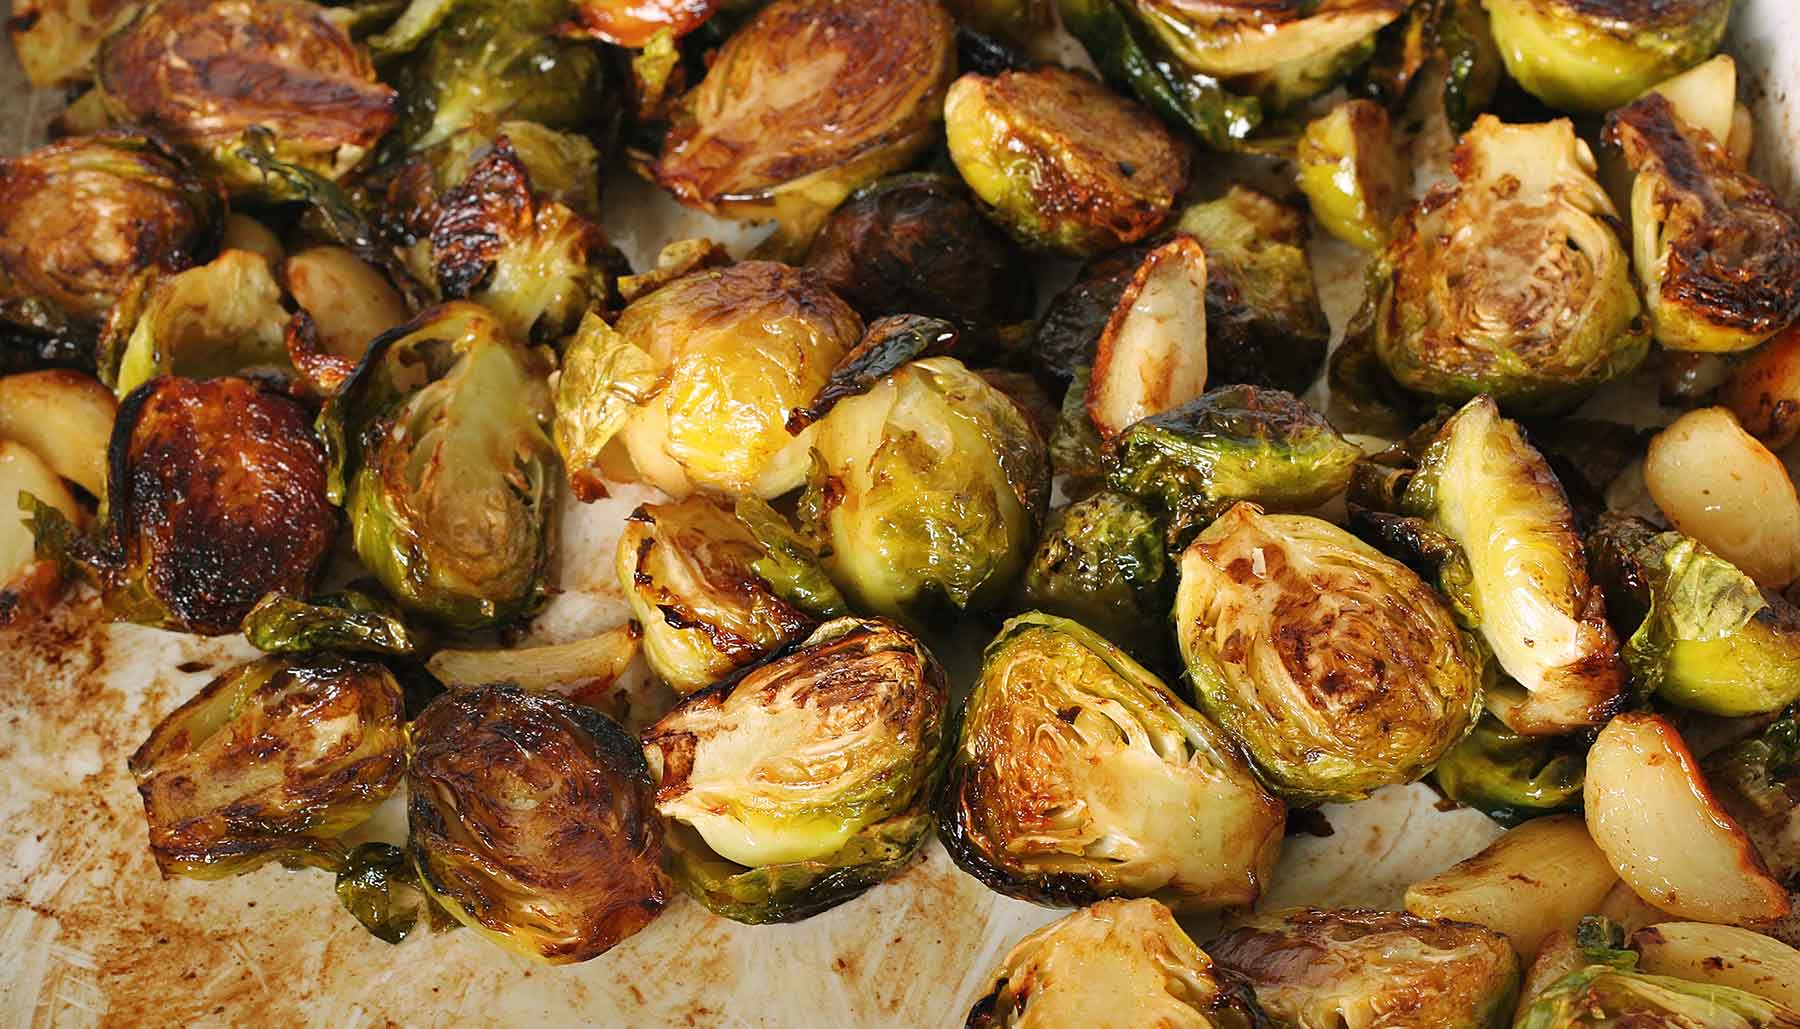 Browned Brussels sprouts